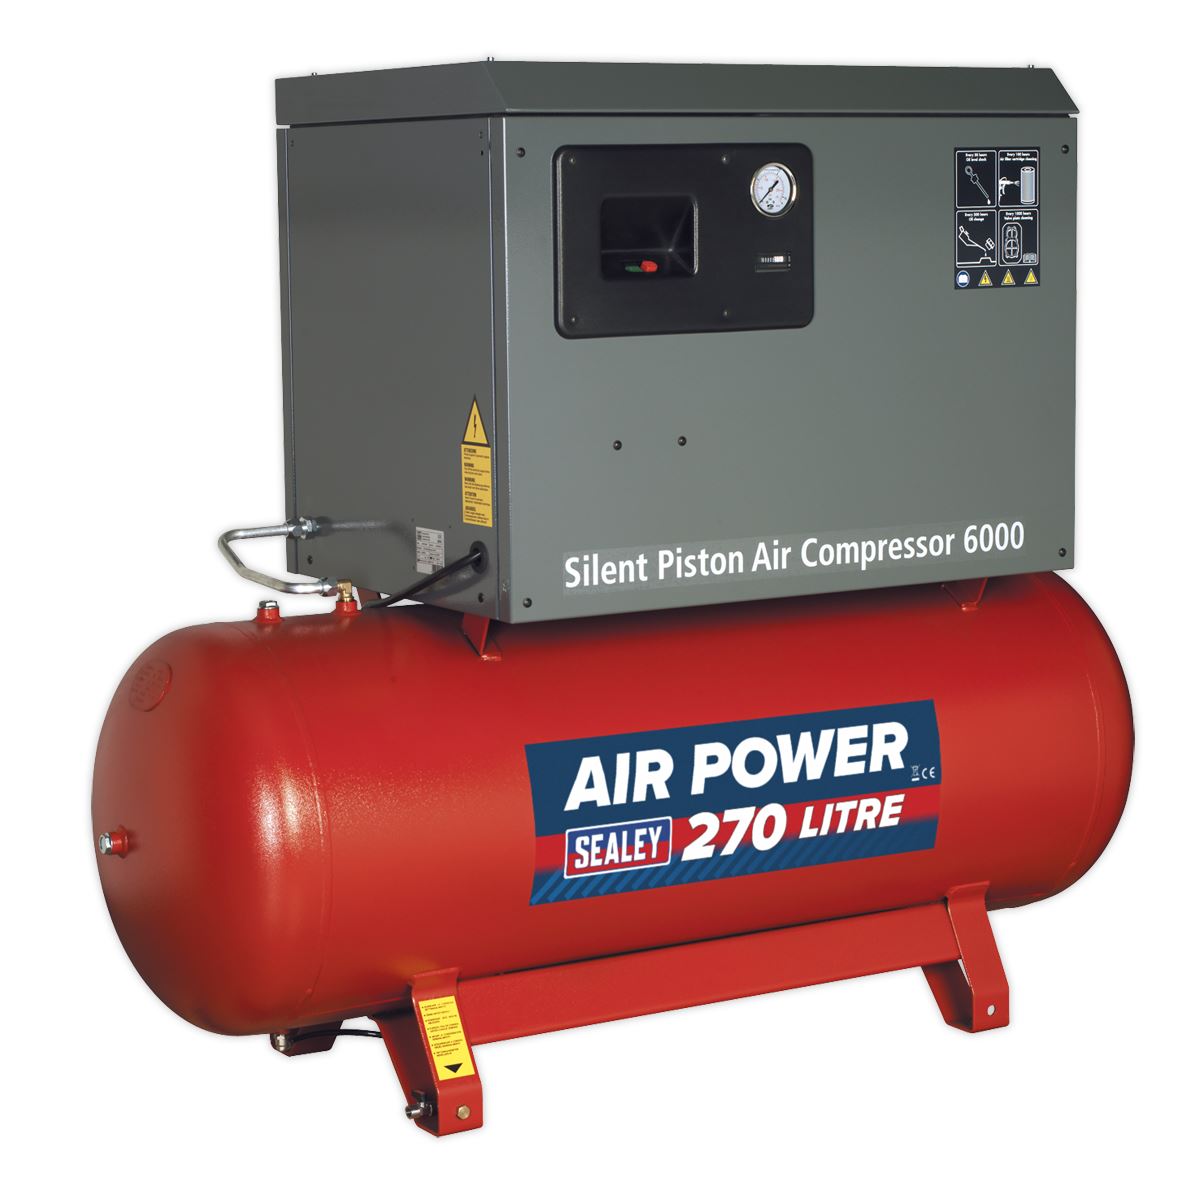 Sealey Air Compressor 270L Belt Drive 5.5hp 3ph 2-Stage with Cast Cylinders Low Noise